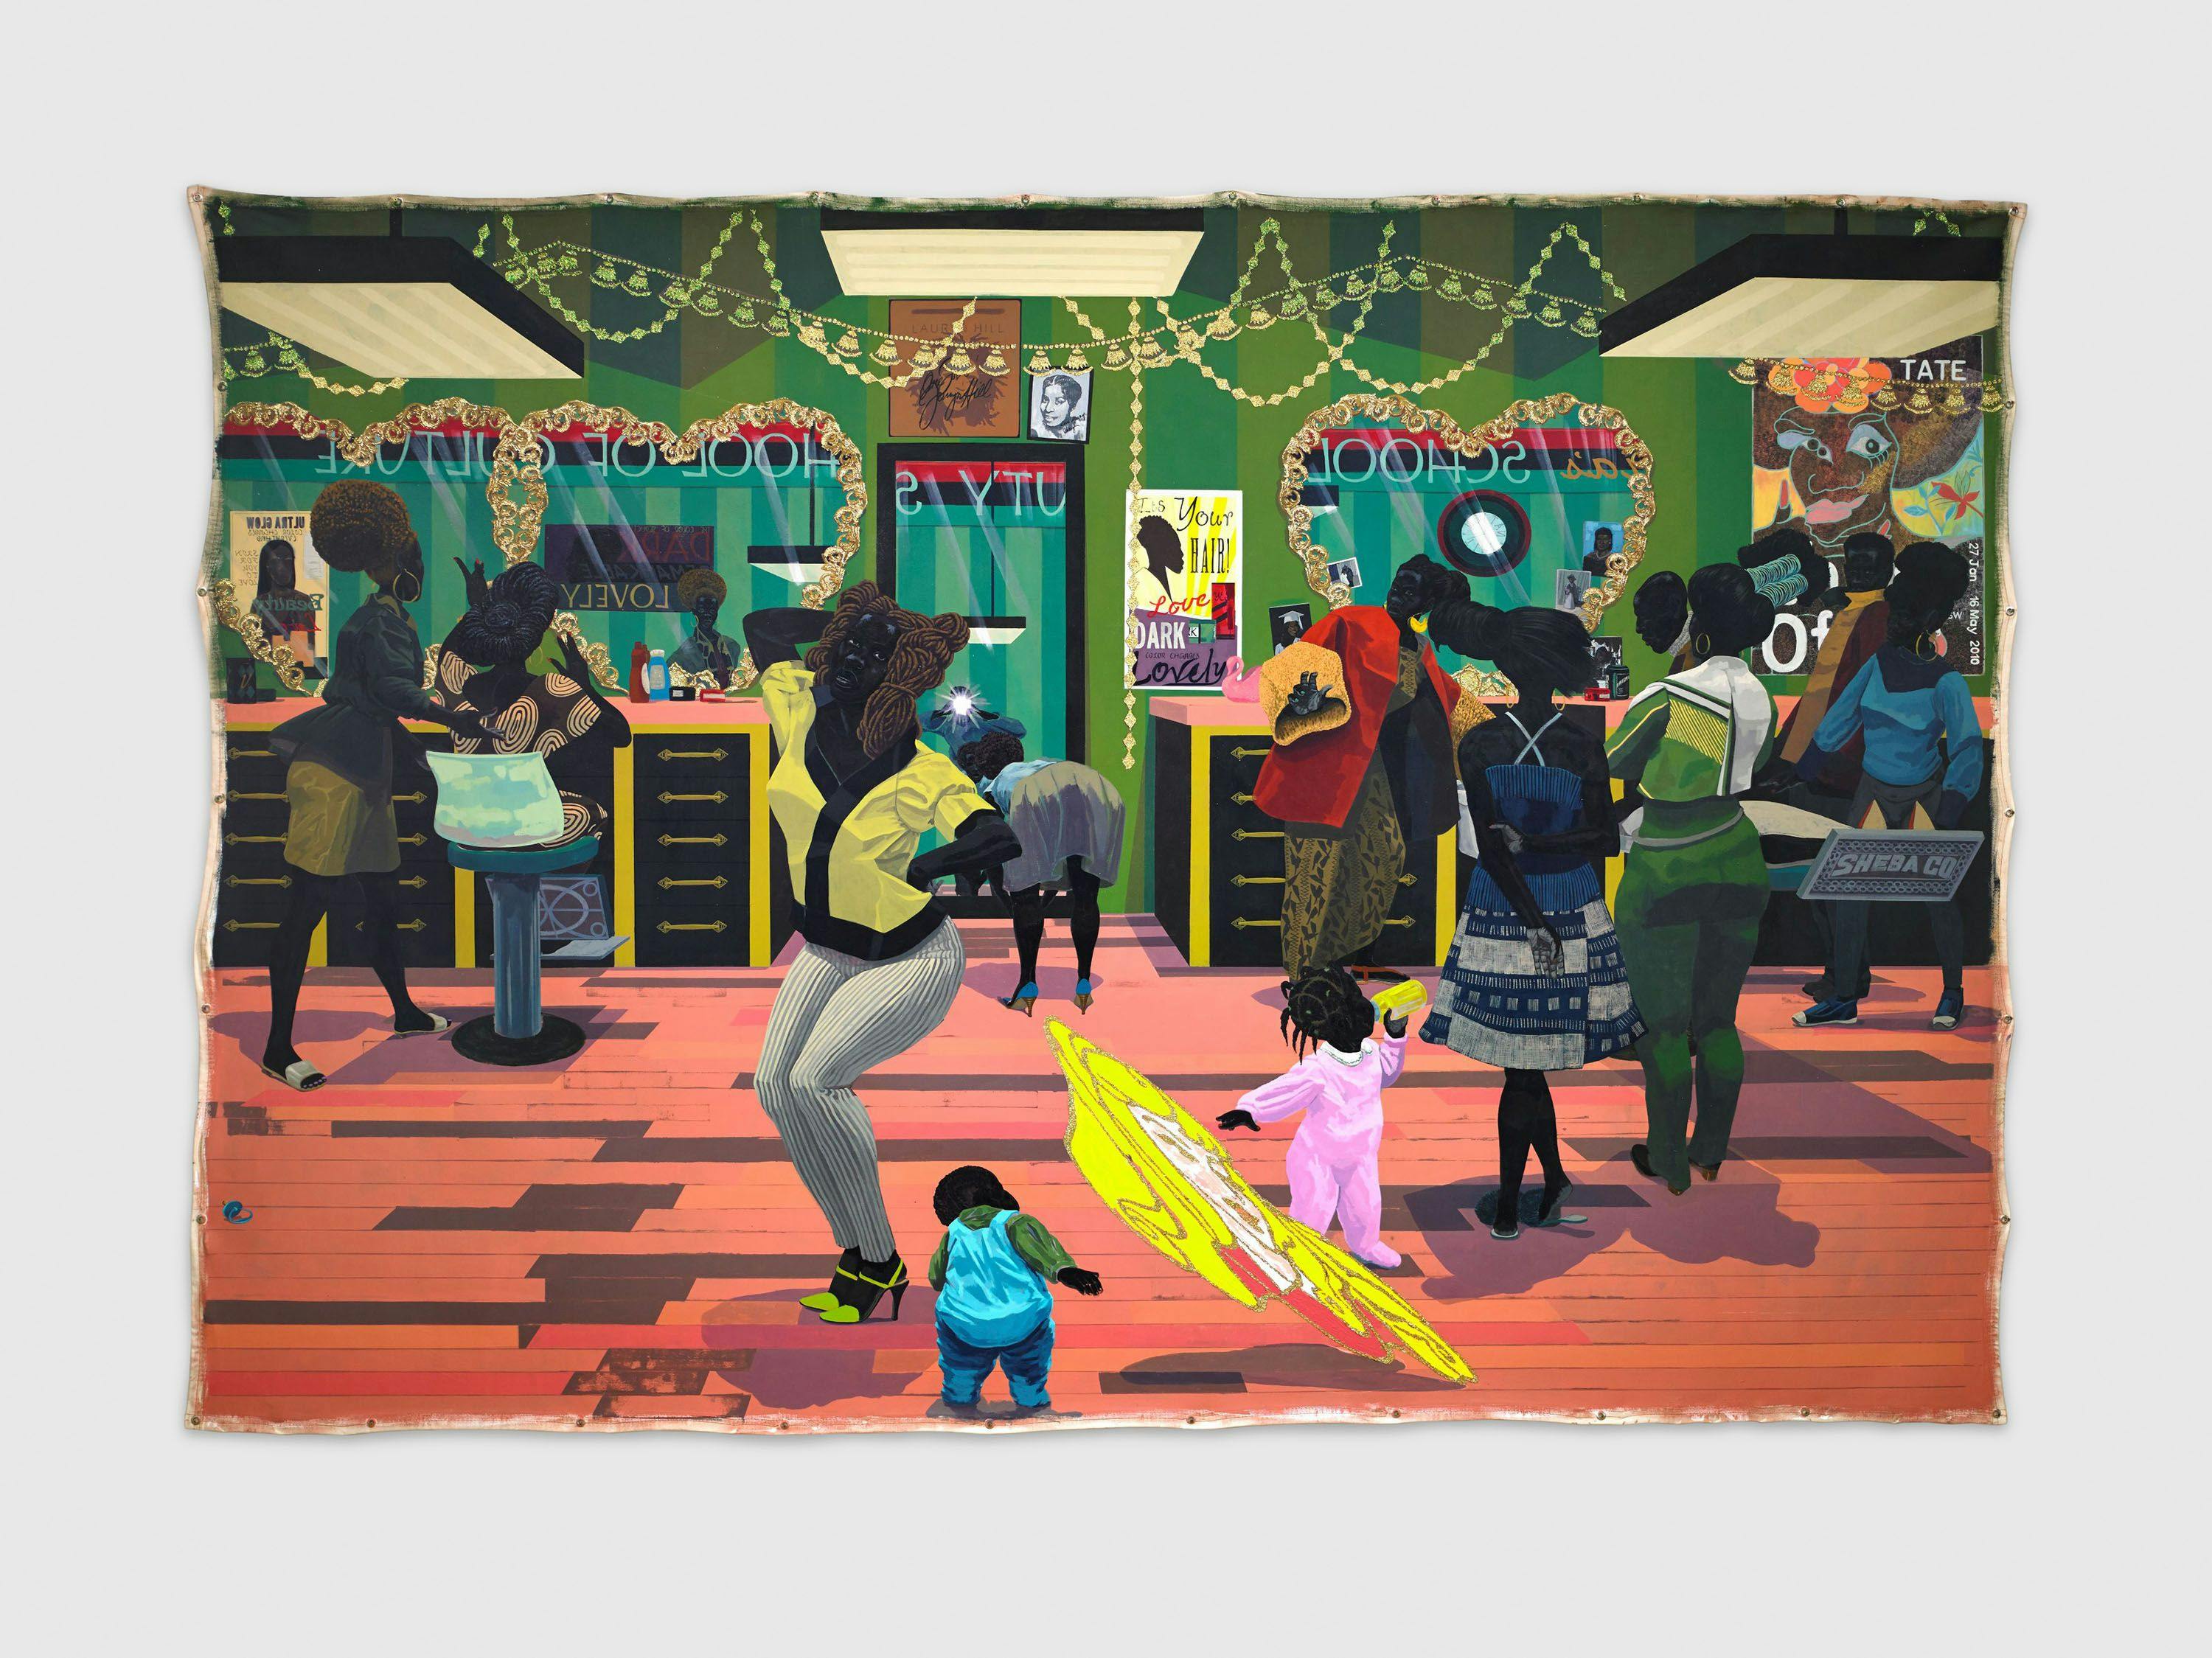 A painting by Kerry James Marshall, titled School of Beauty, School of Culture, dated 2012.